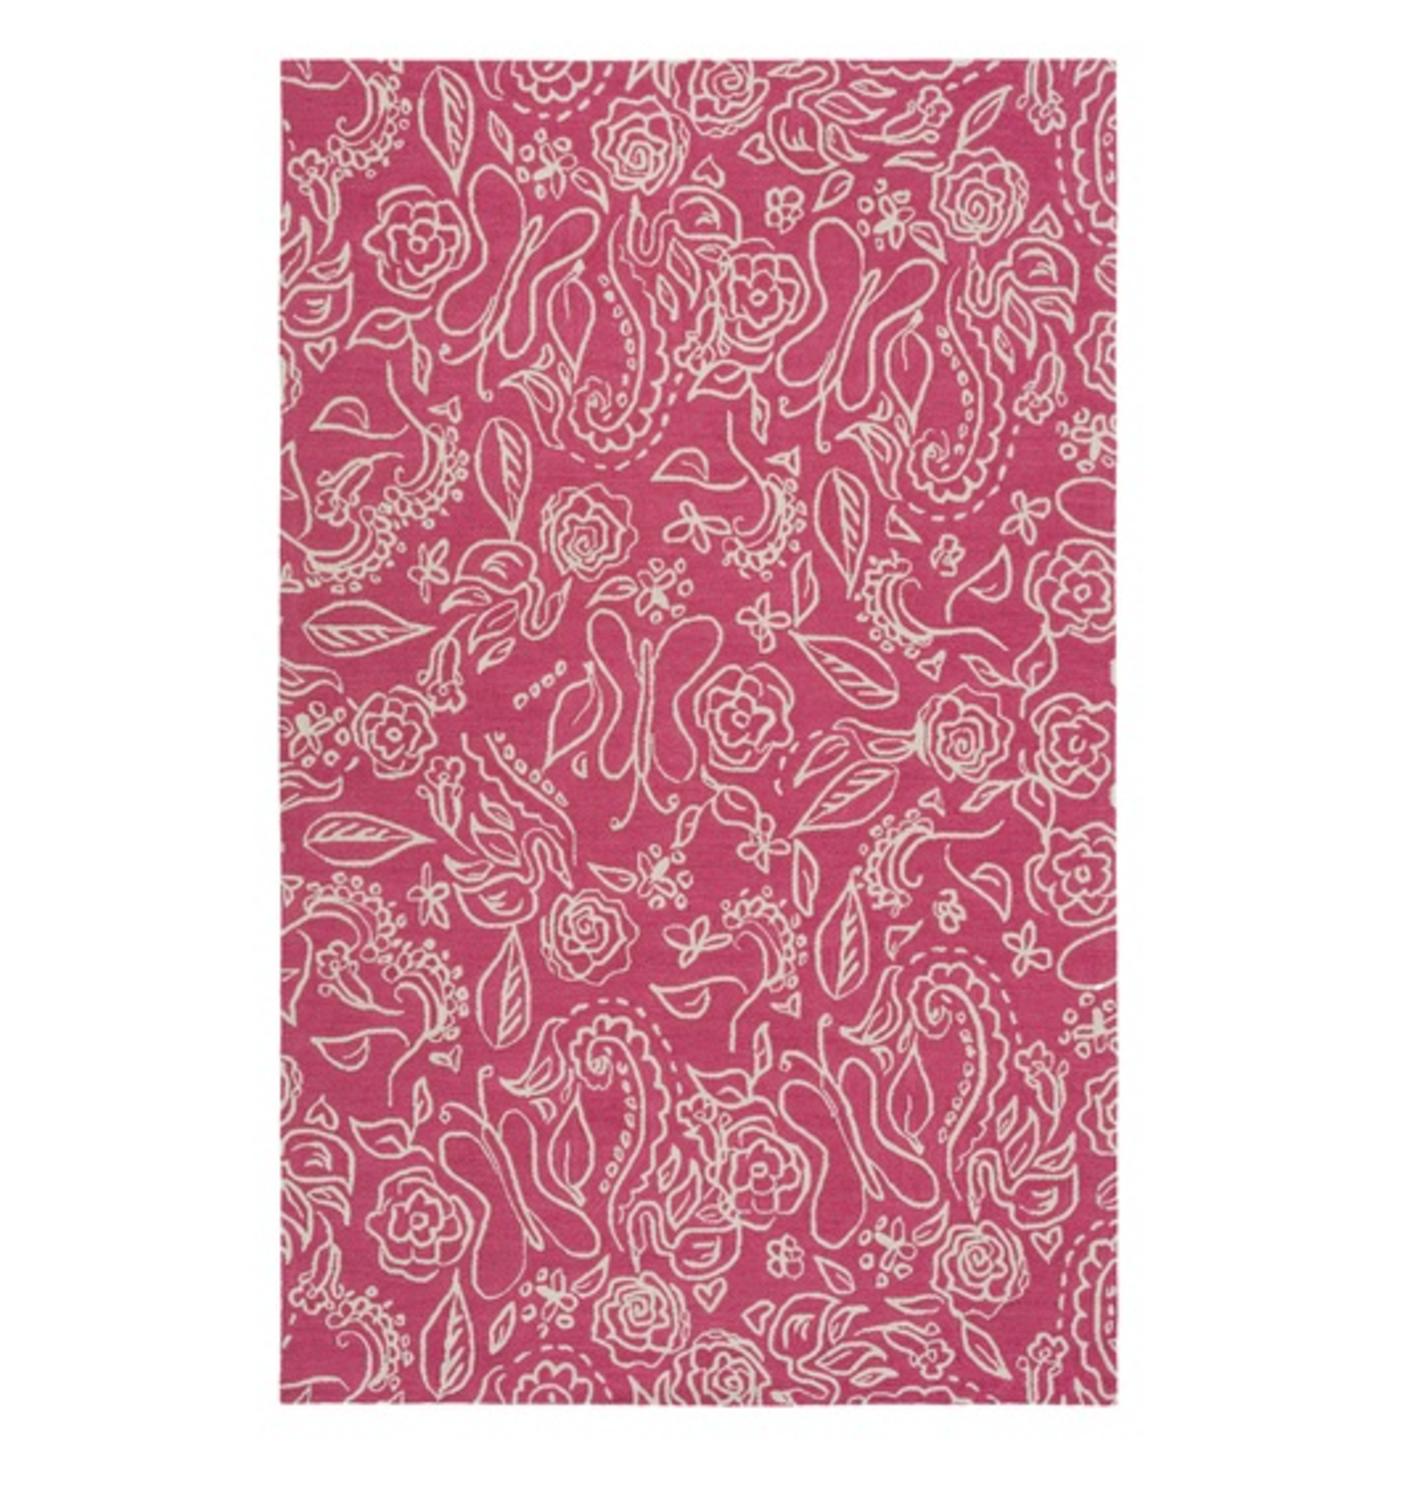 Diva At Home  5 x 7.5 Gentle Butterfly Porcelain White and Turnip Pink Hand Hooked Wool Area Throw Rug